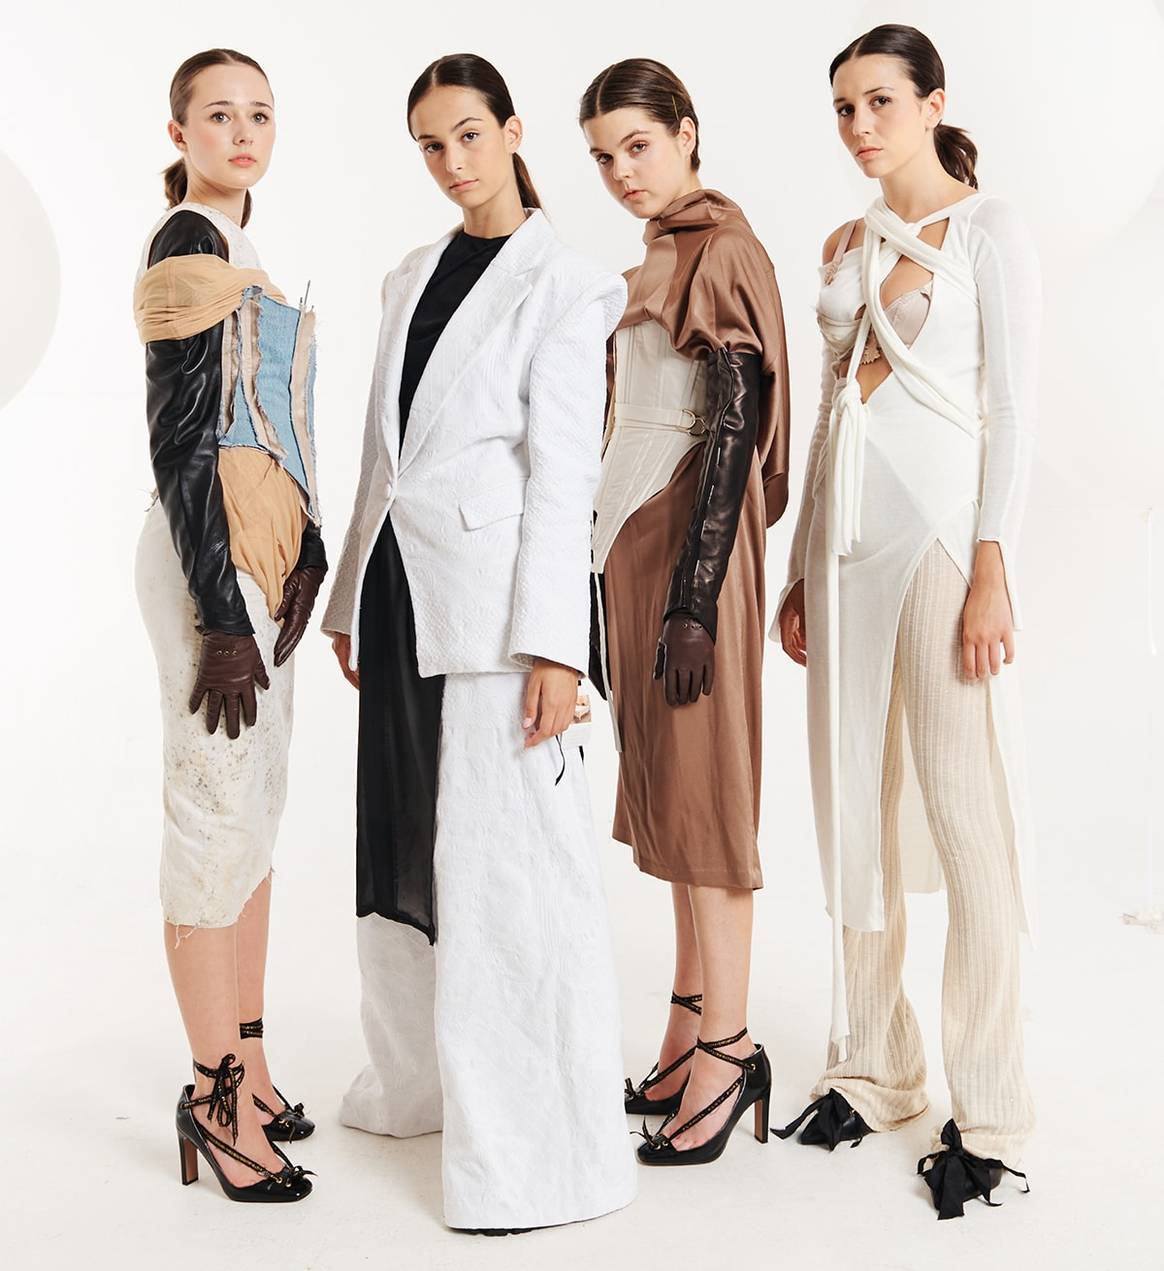 Four upcycled looks from LCI Barcelona student Sara Bailac's
graduation collection